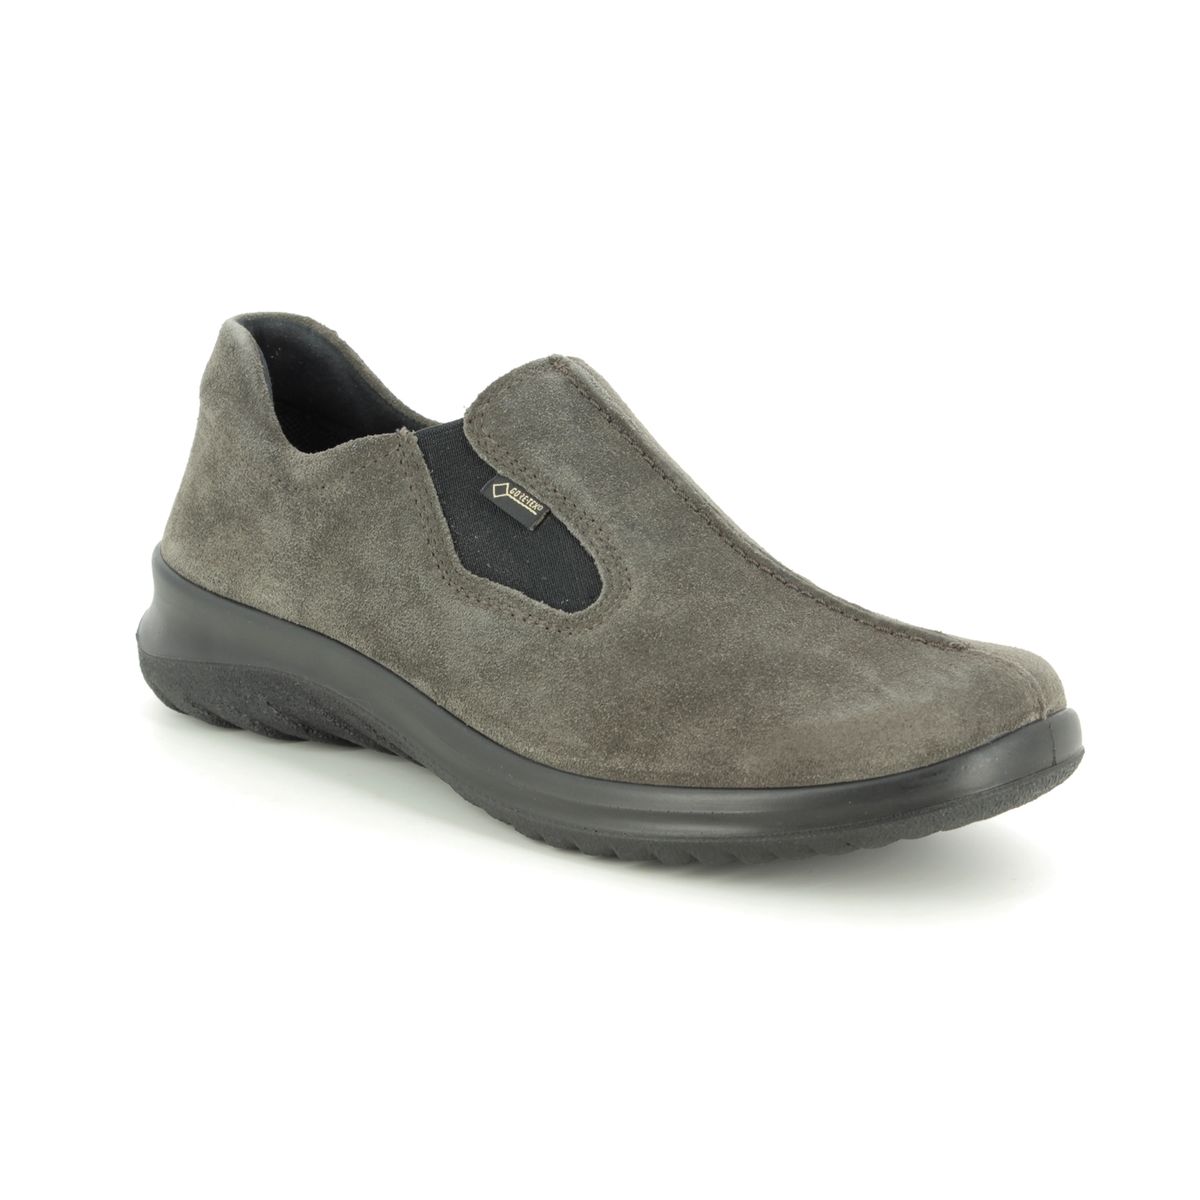 Legero Soft Shoe Gtx Grey Suede Womens Comfort Slip On Shoes 09568-28 In Size 6 In Plain Grey Suede